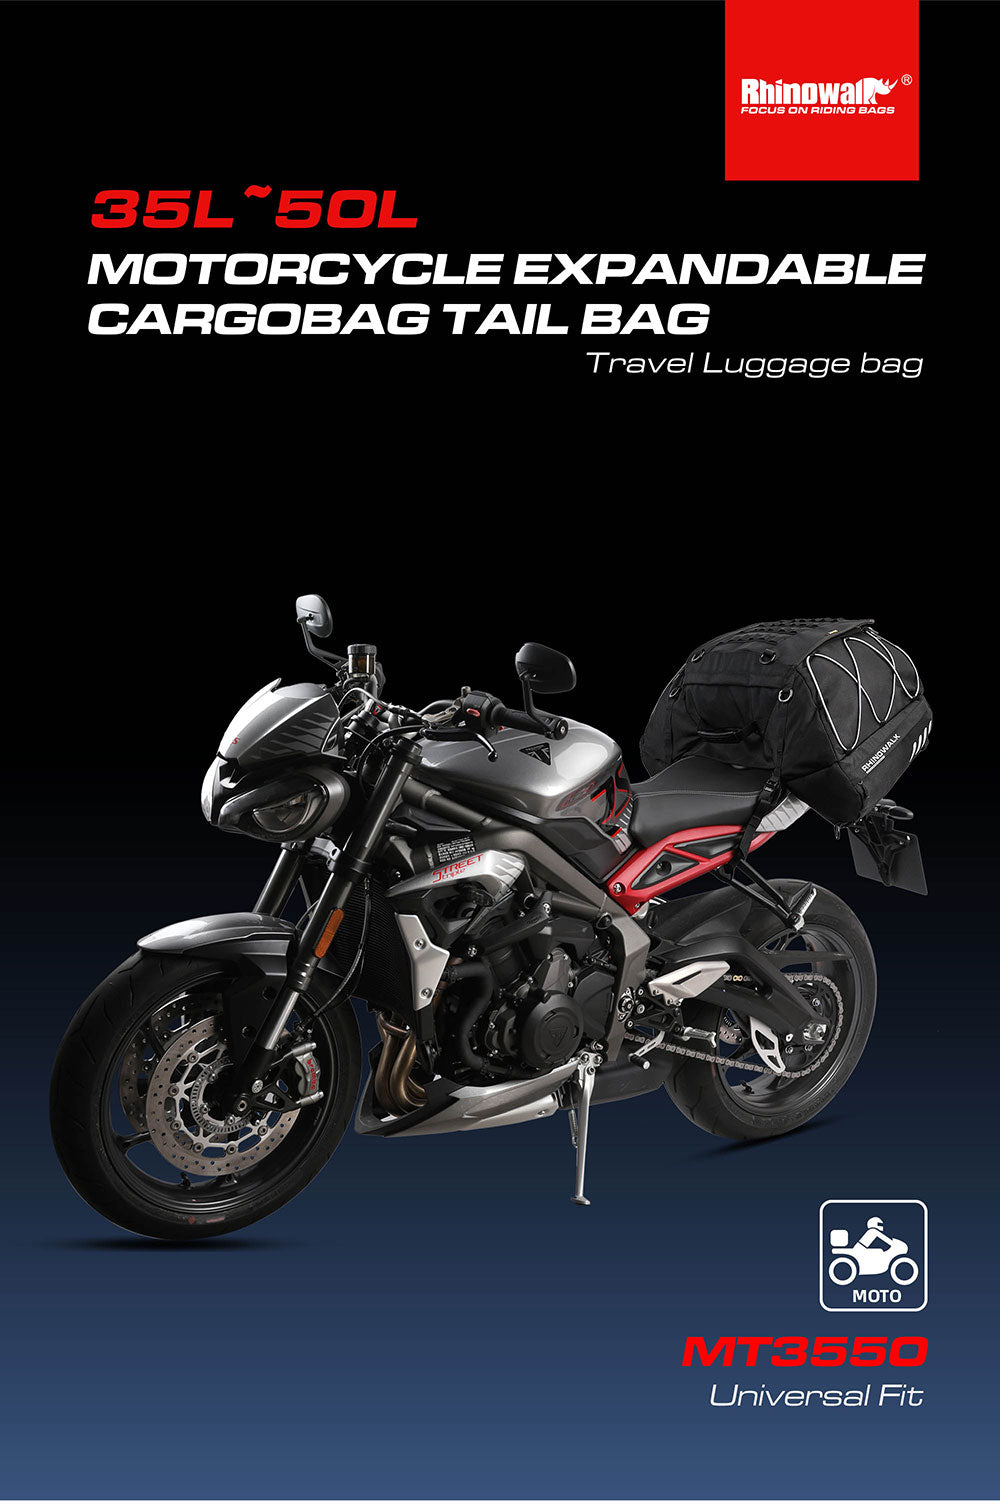 35L-50L Motorcycle Tail  Bag with Expandable